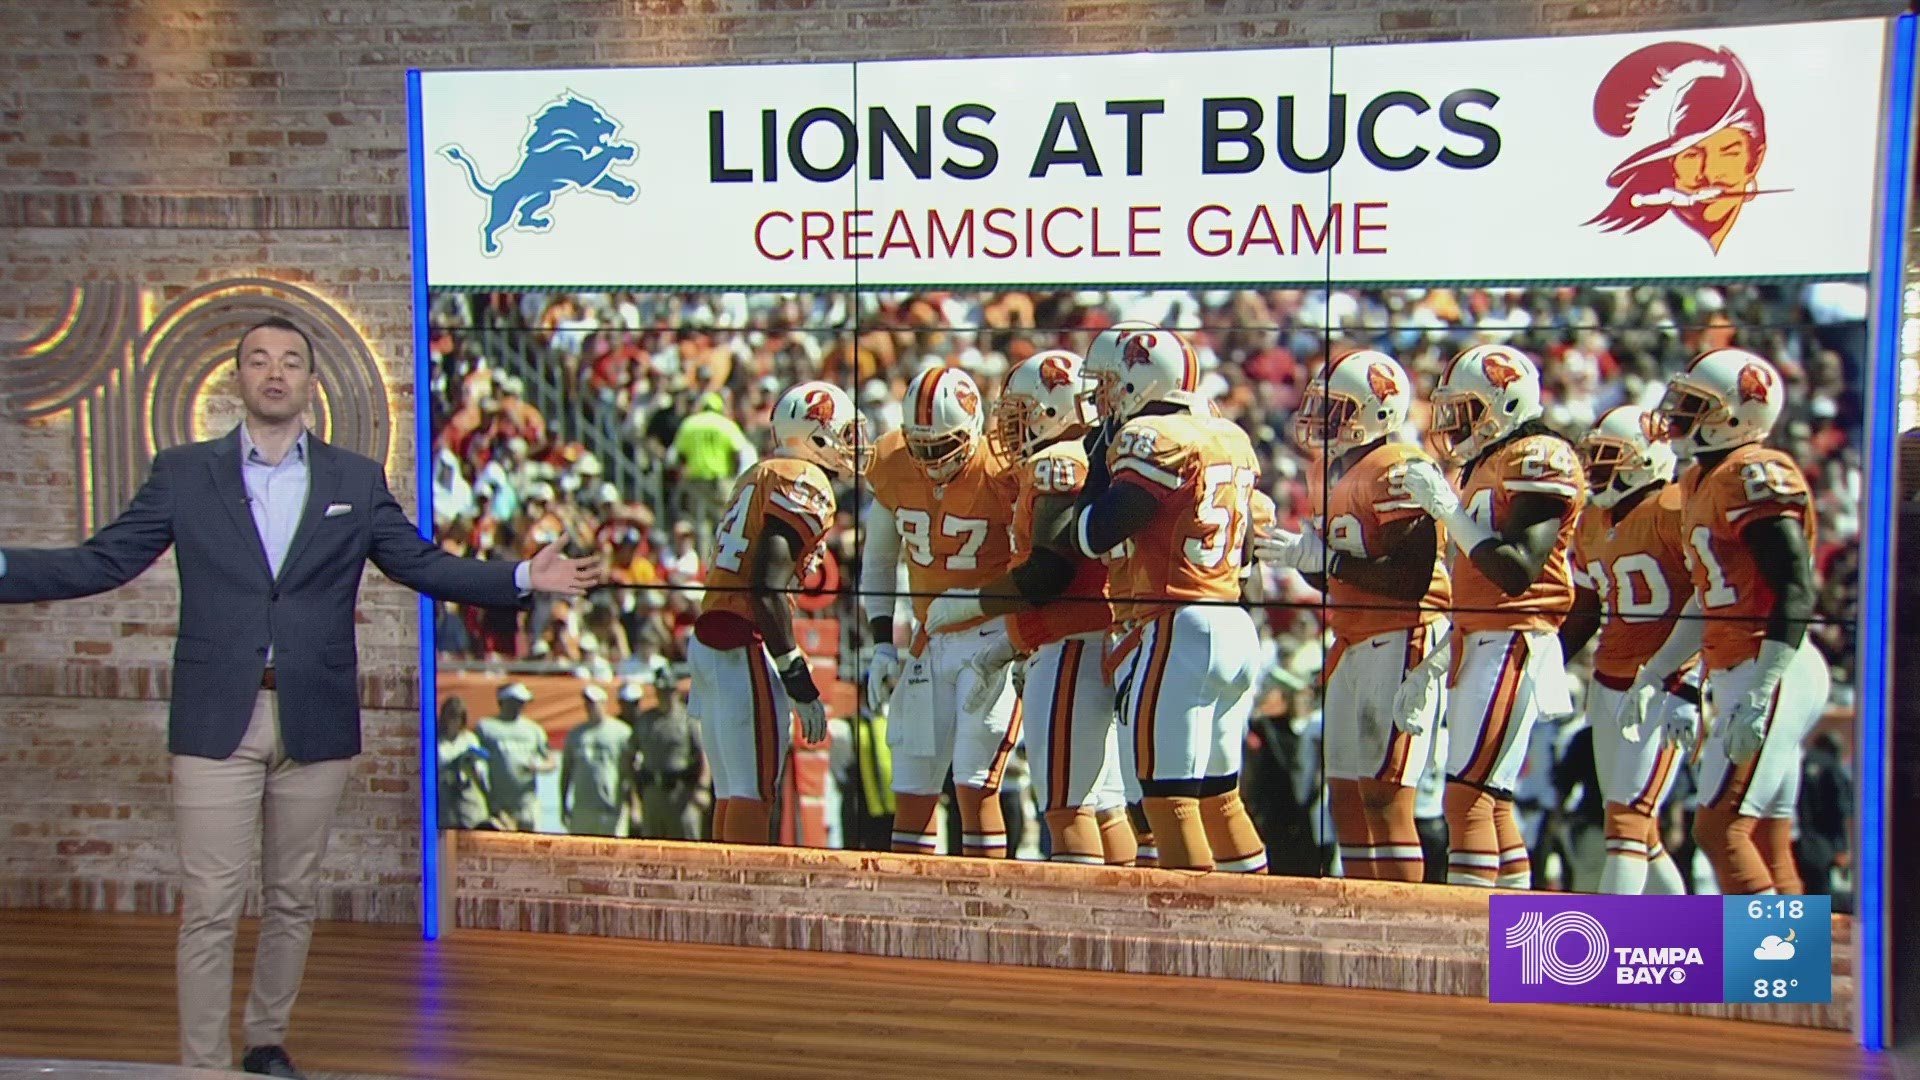 Bucs to wear iconic creamsicle uniforms in Week 6 against Lions